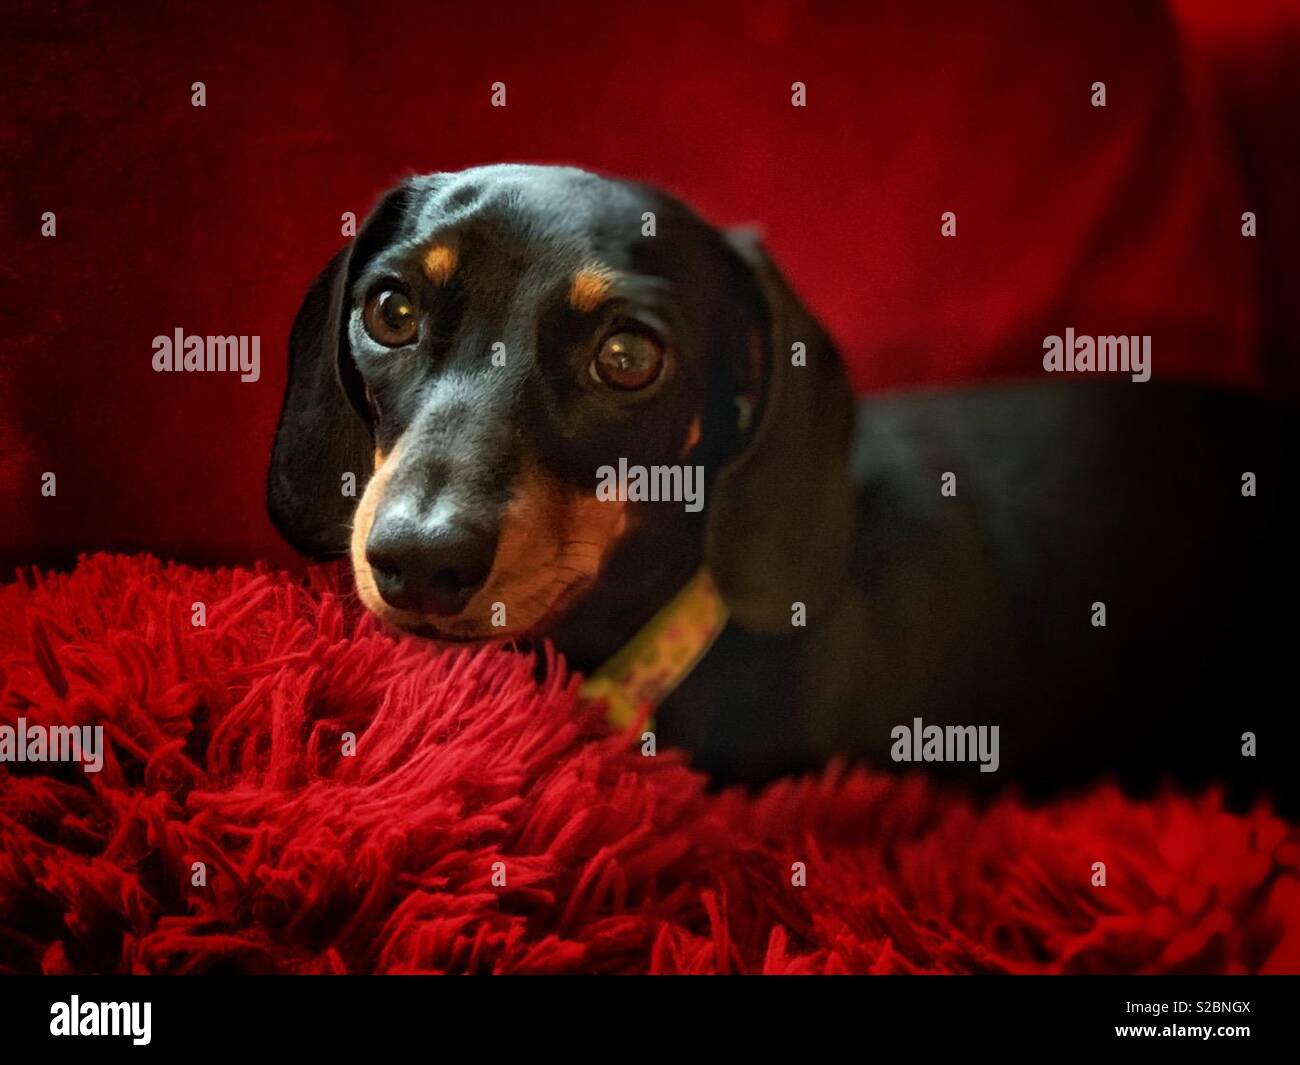 Dachshund portrait on a red cushionwith red background Stock Photo